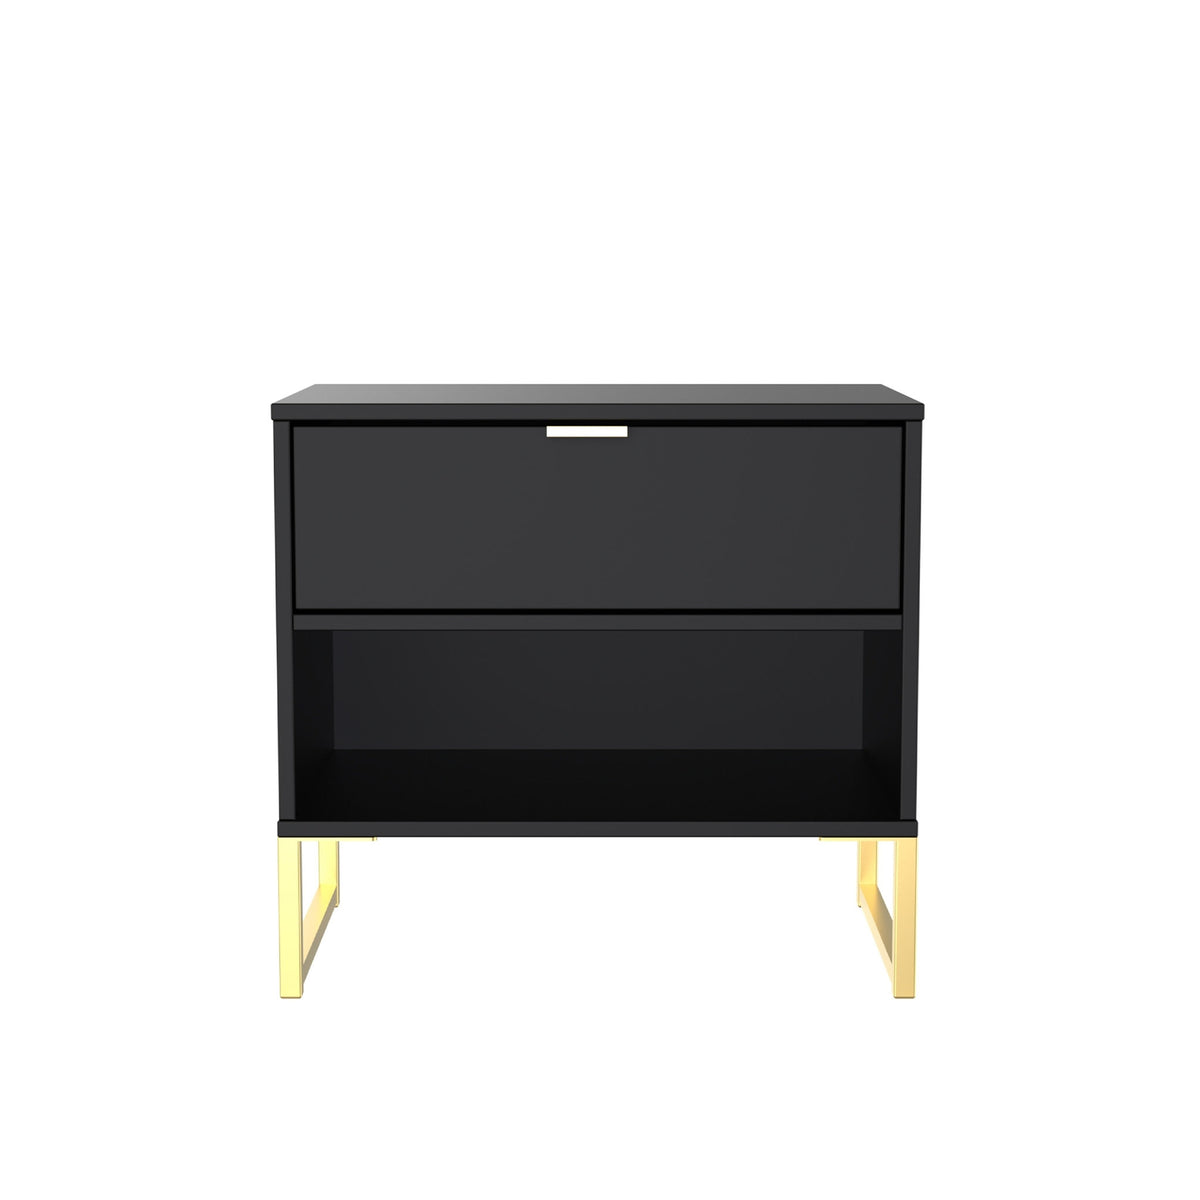 Hudson Hudson 1 Drawer with open shelf side table with gold legs from Roseland